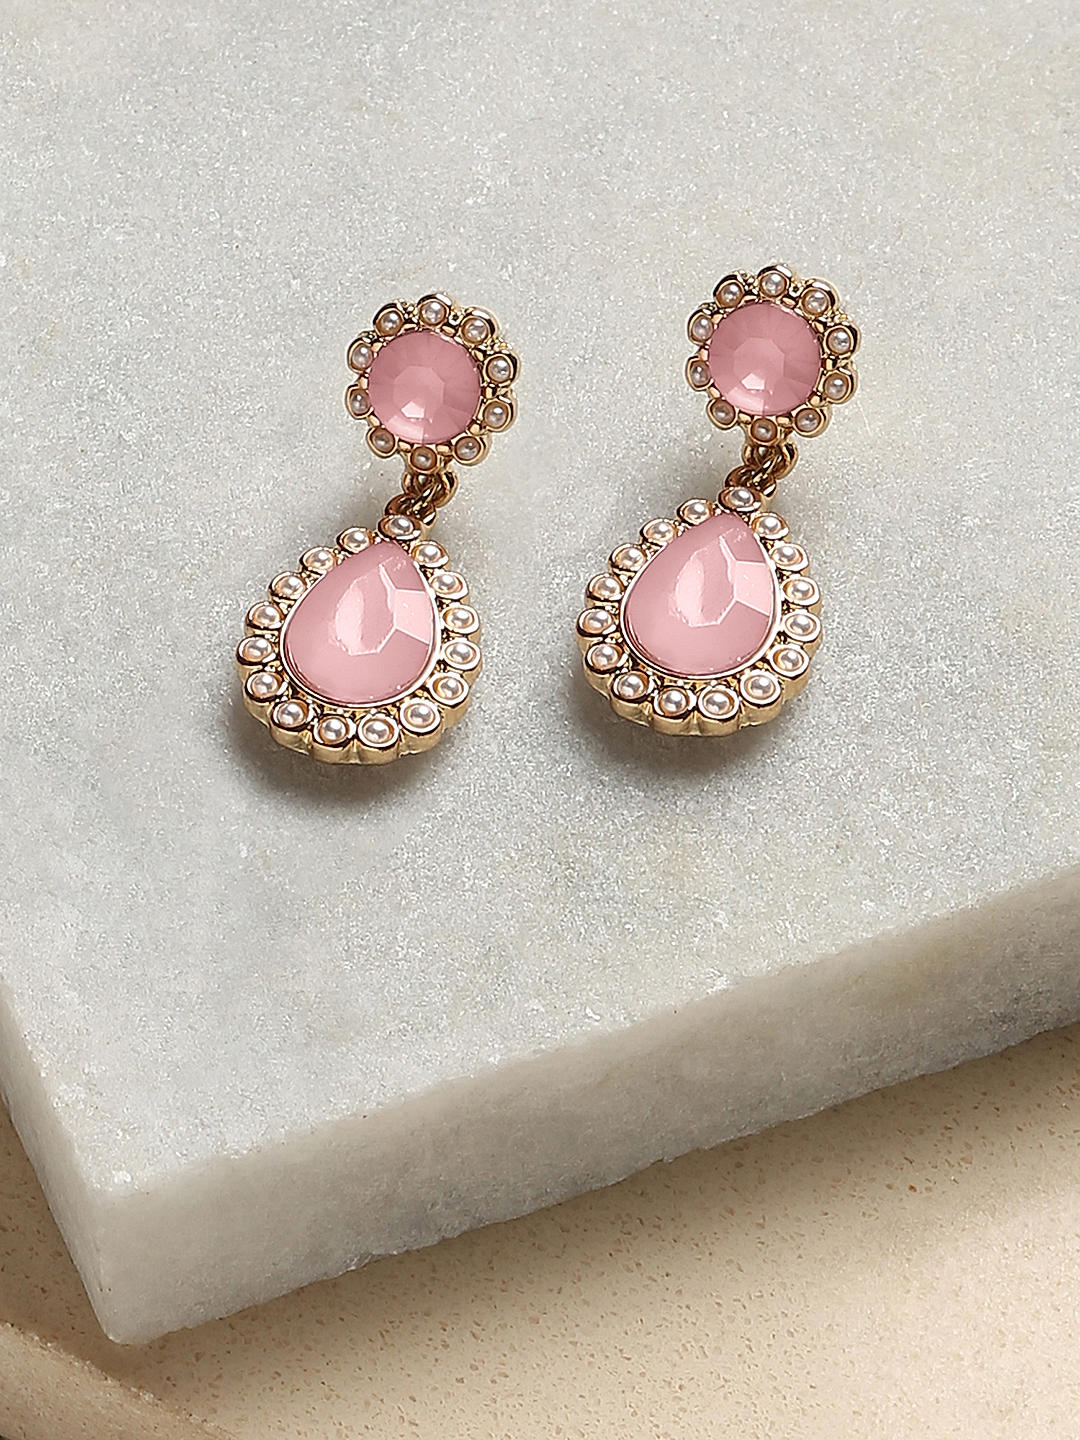 Lady Cameo Earrings, Blush Pink Earrings, Victorian Cameo Jewelry, Antique  Replica, Vintage Style Jewelry, Romantic Shabby Chic Modern Retro - Etsy | Blush  pink earrings, Vintage style jewellery, Cameo earrings